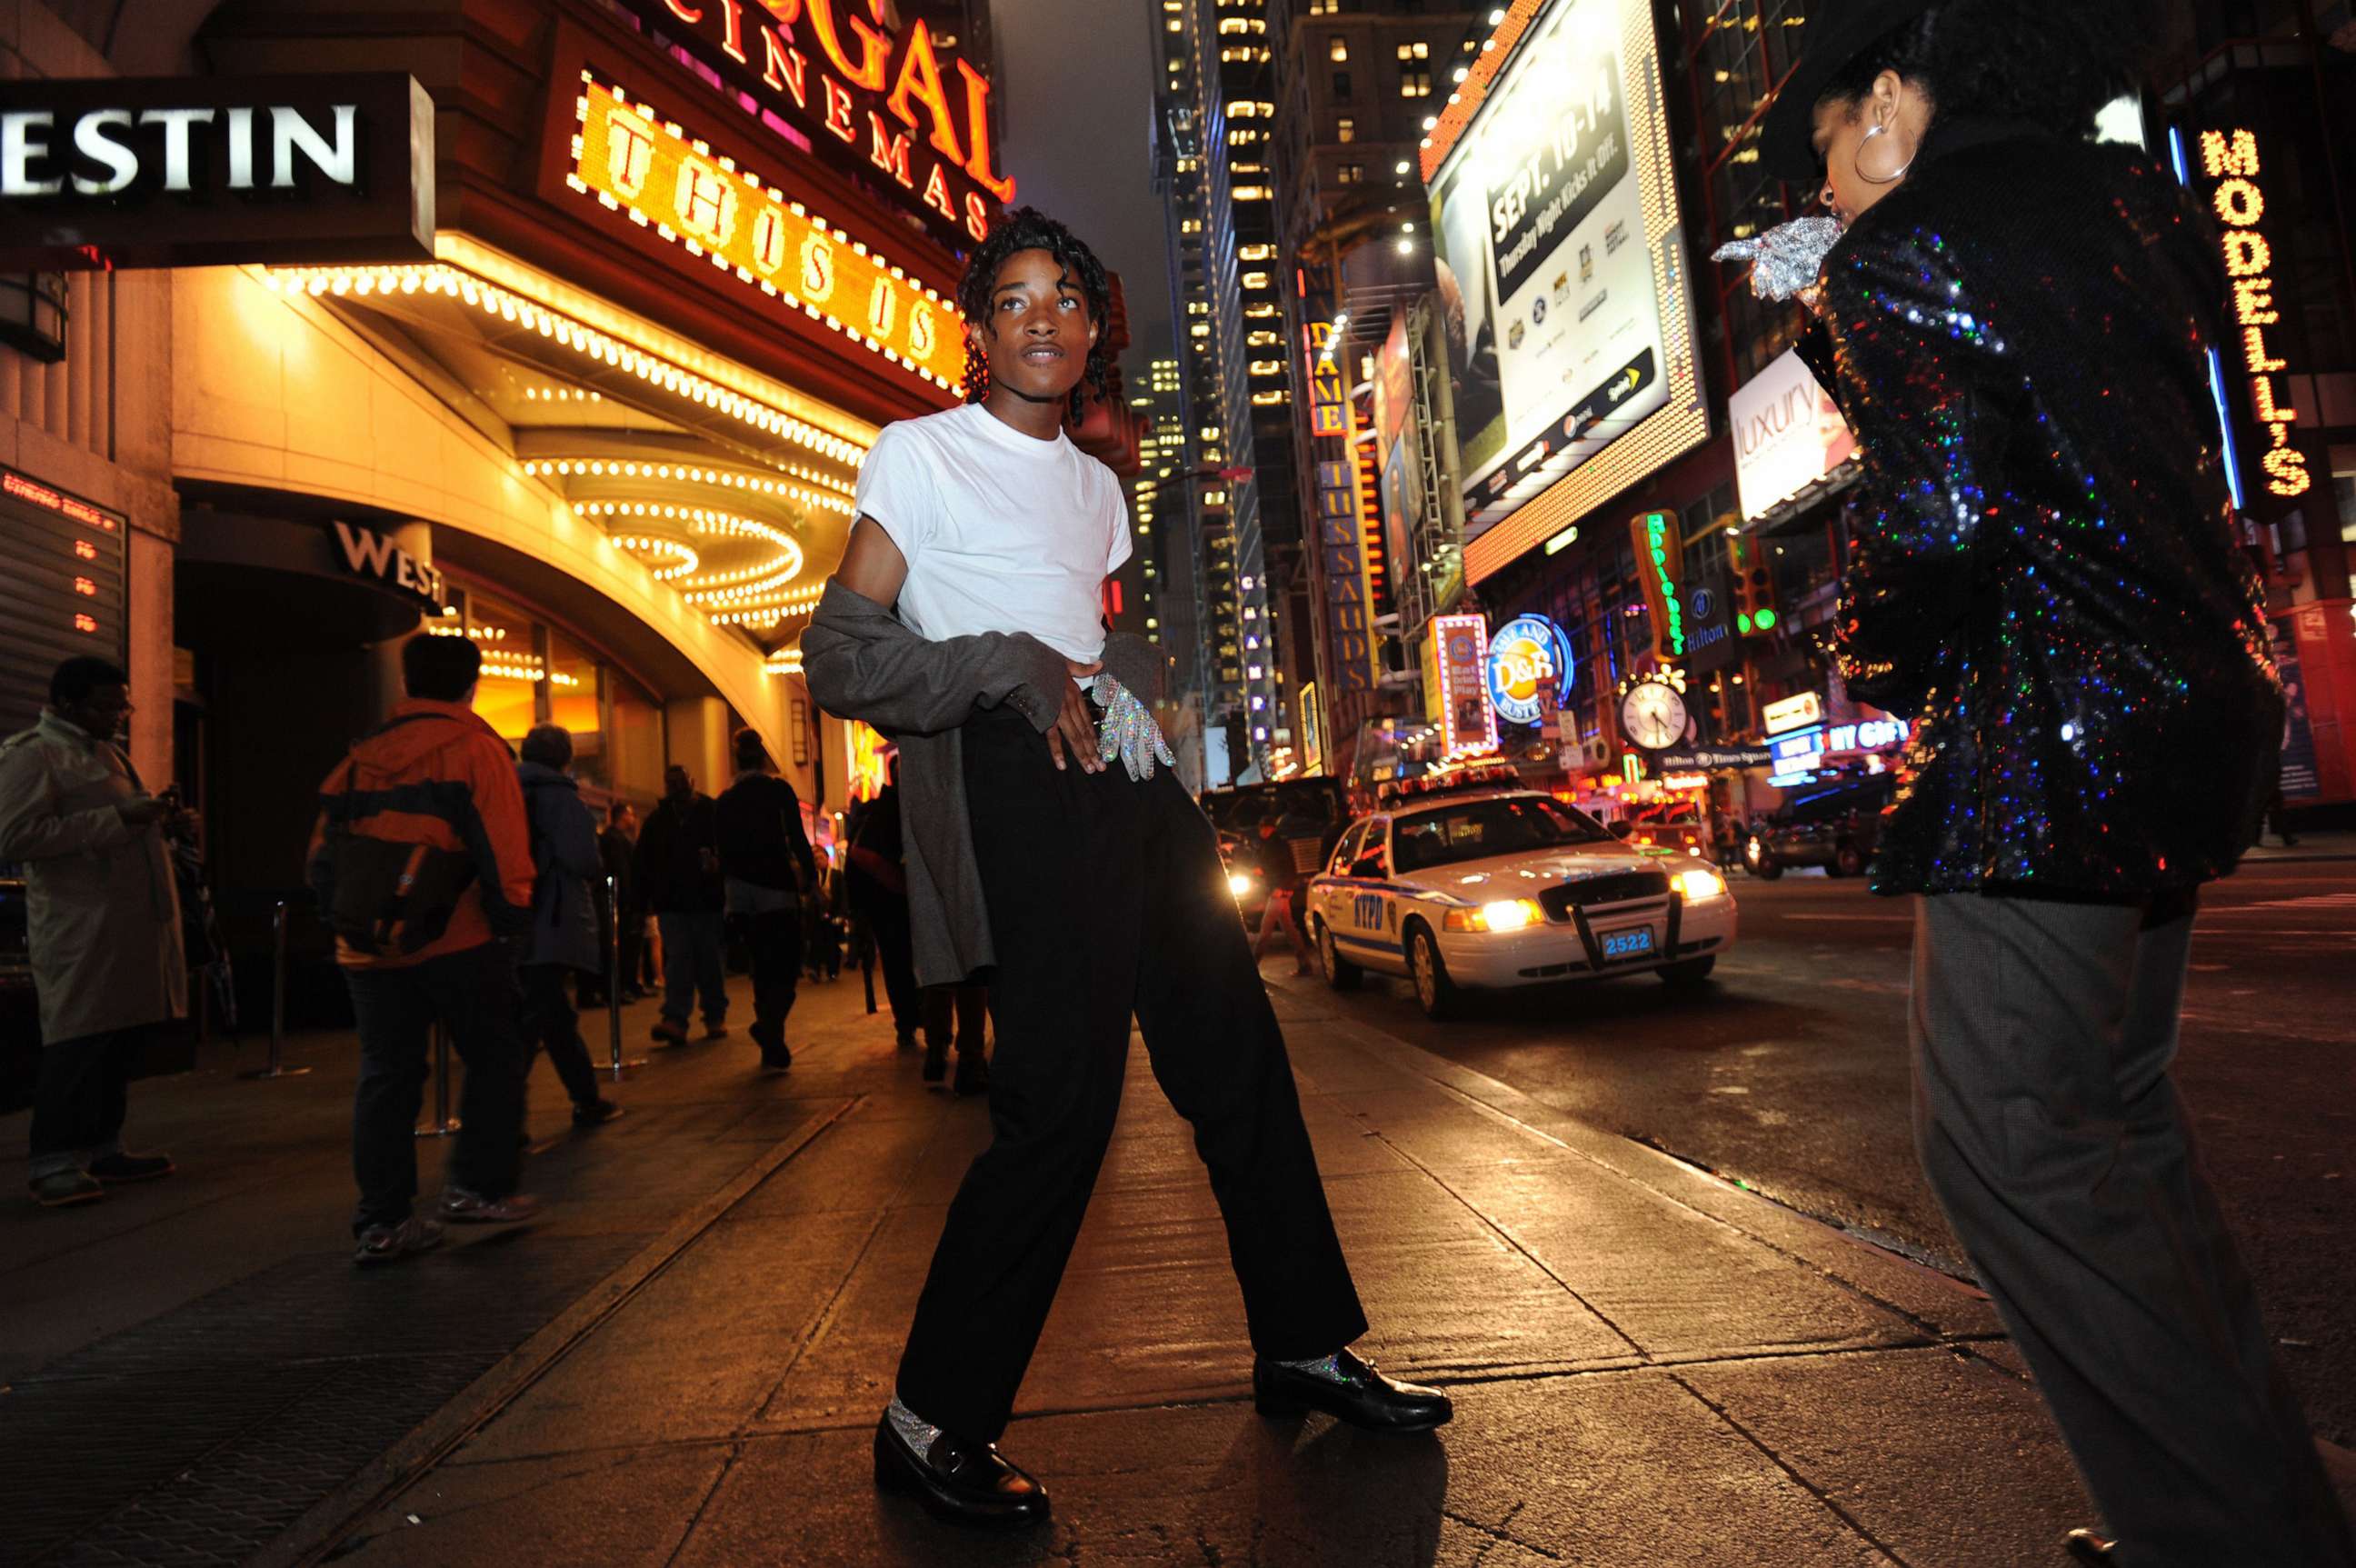 PHOTO: Jordan Neely is pictured before going to see the Michael Jackson movie, 'This is It' outside the Regal Cinemas in Times Square in 2009.